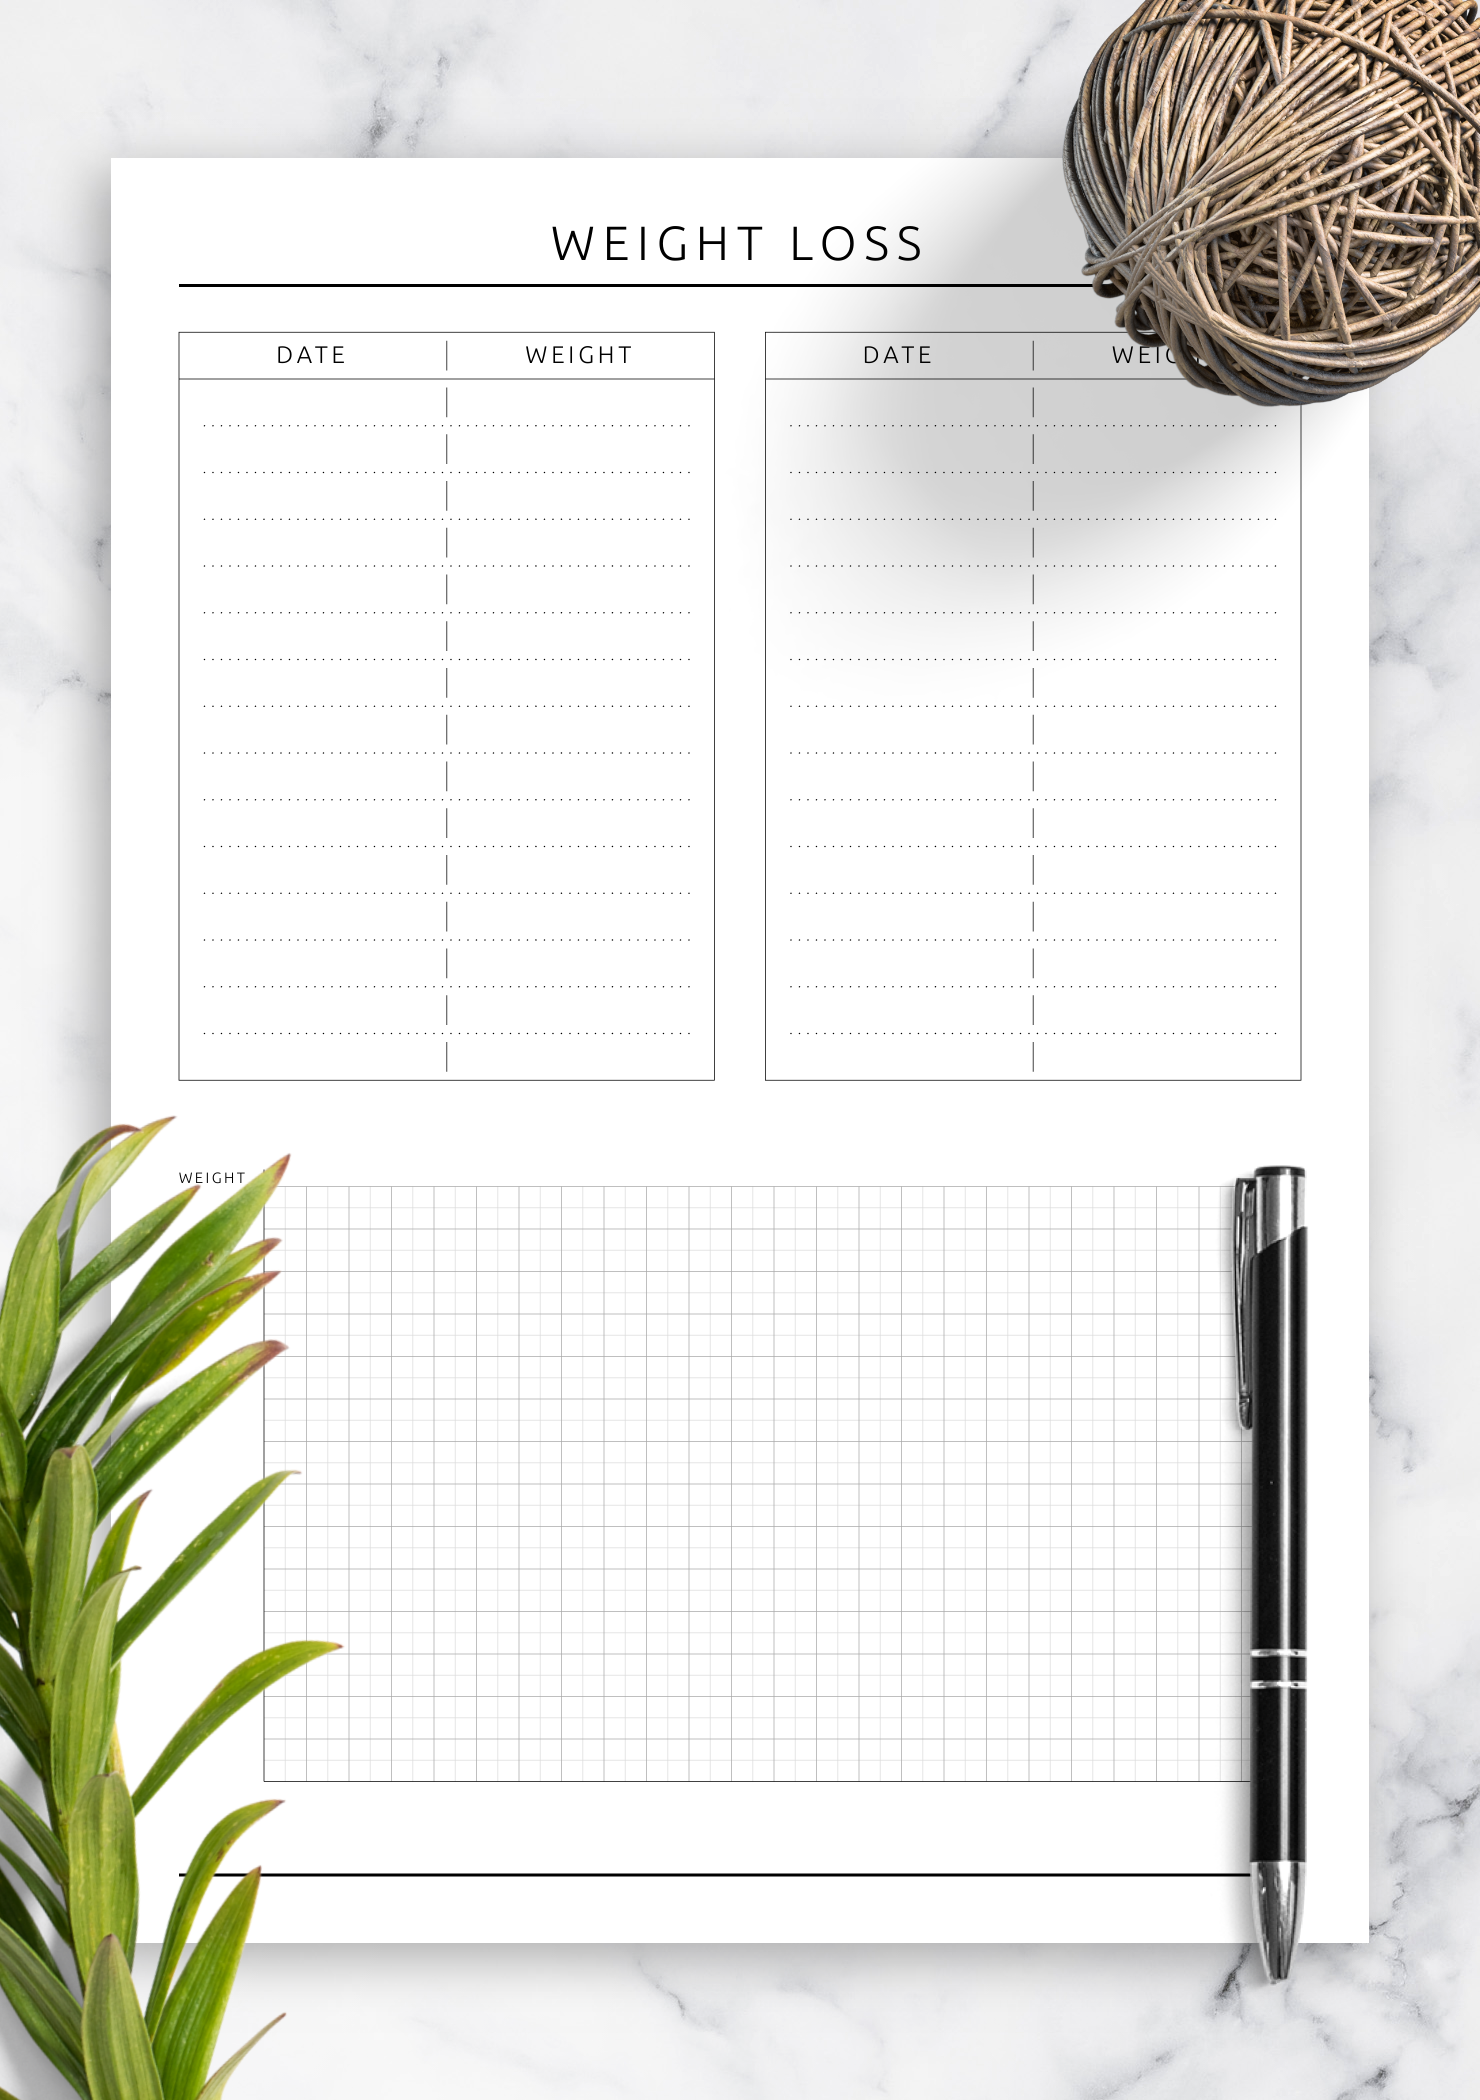 weight loss tracker template word